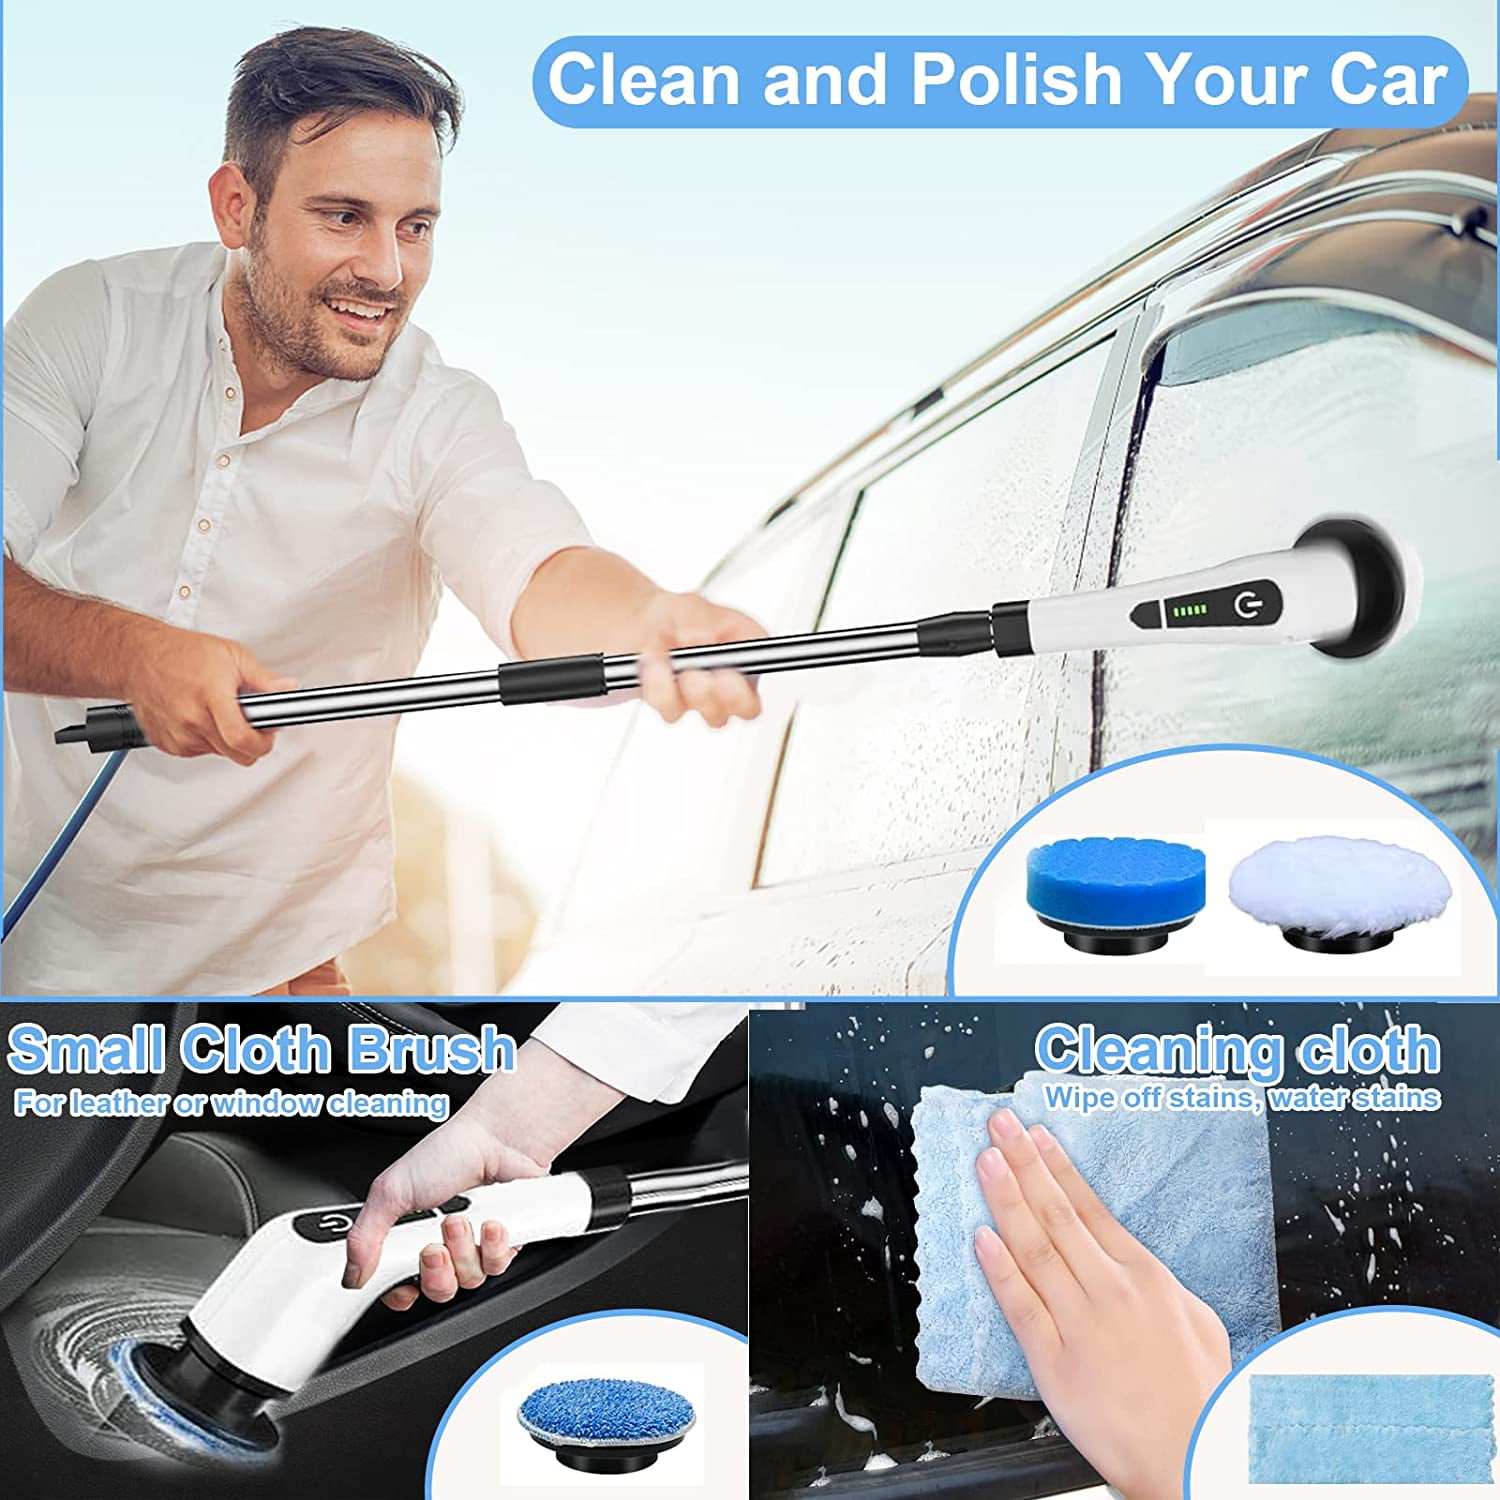 Electric Spin Scrubber: 7-in-1 Cleaning Tool For Every Surface – SheKnows